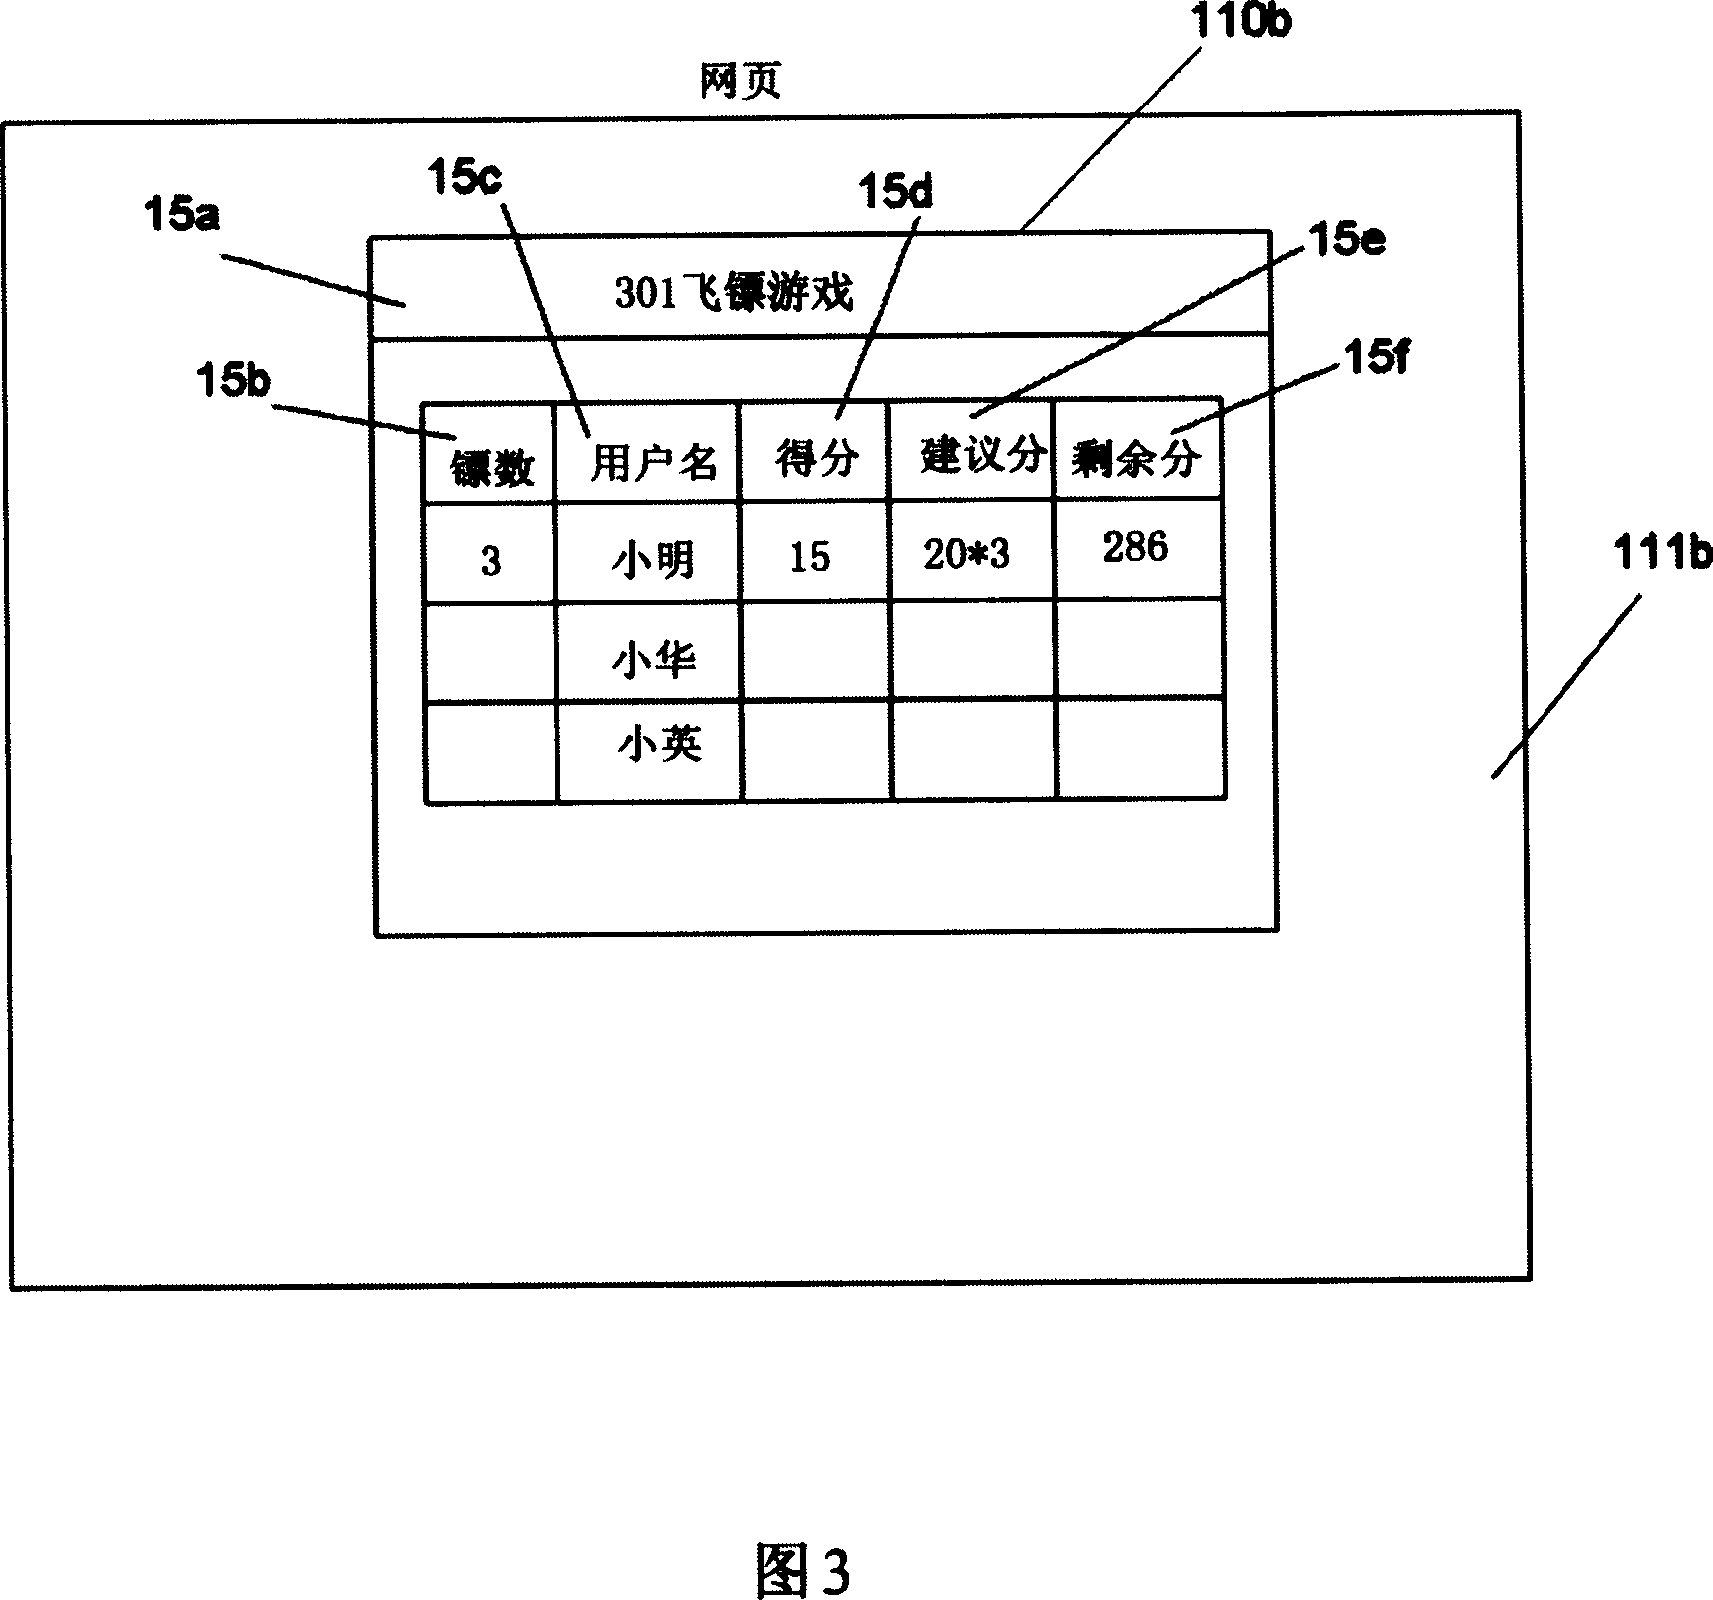 Electron motion game system based on network and method thereof